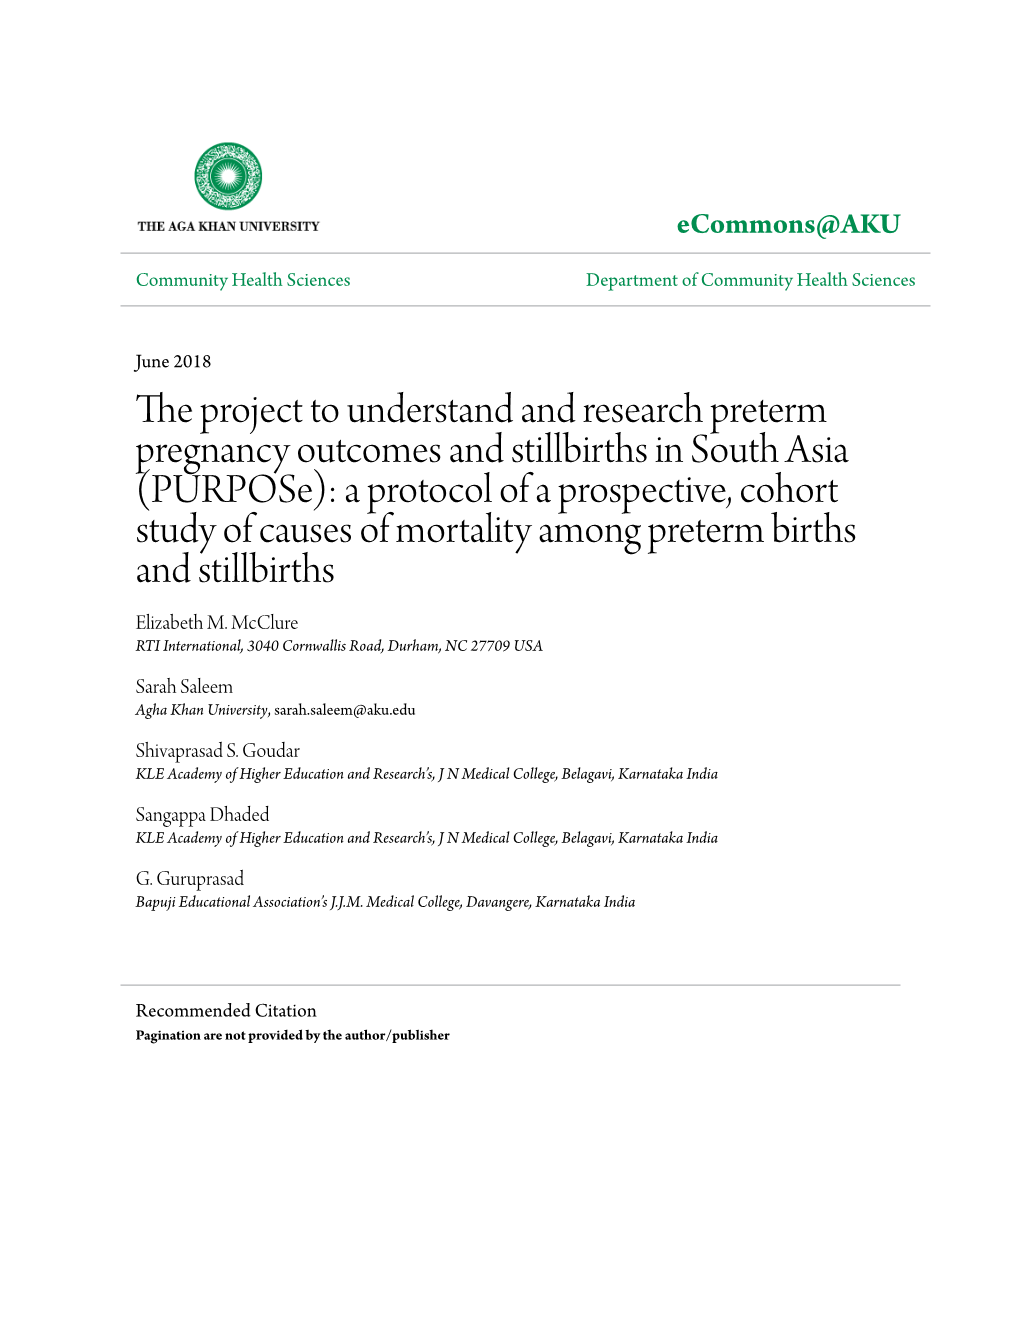 The Project to Understand and Research Preterm Pregnancy Outcomes and Stillbirths in South Asia